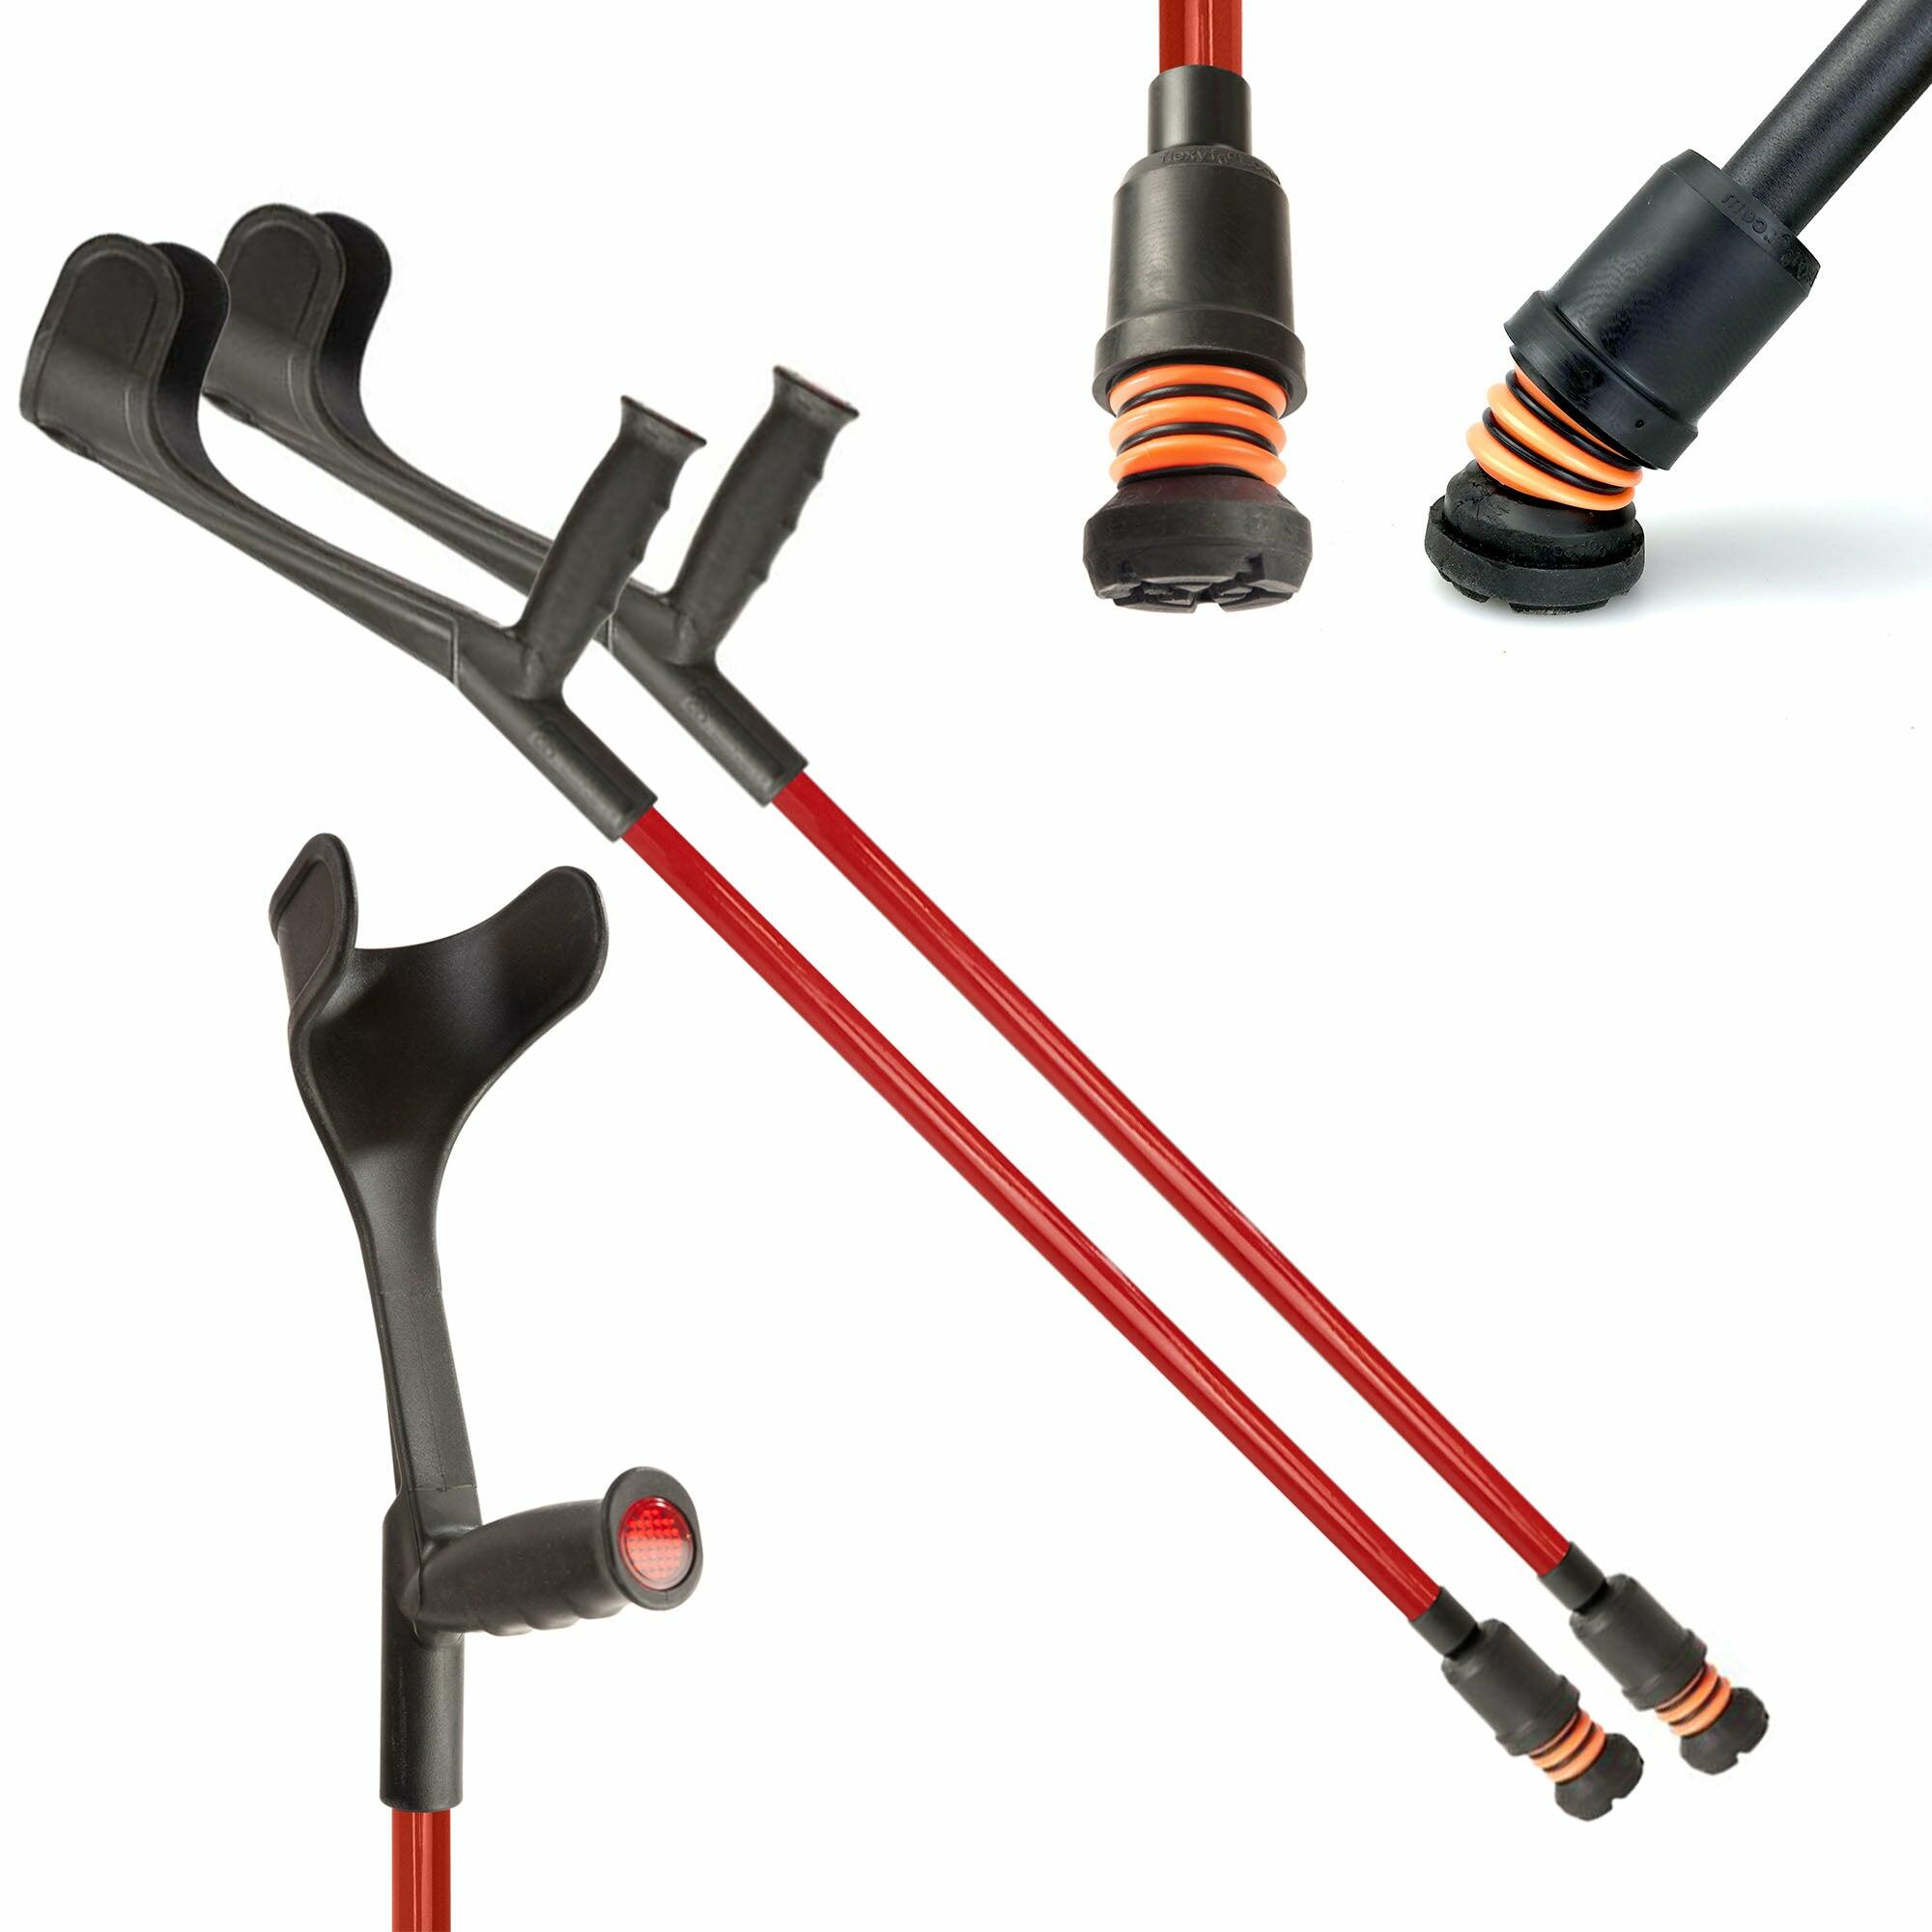 A pair of red Flexyfoot Soft Grip Open Cuff Crutches